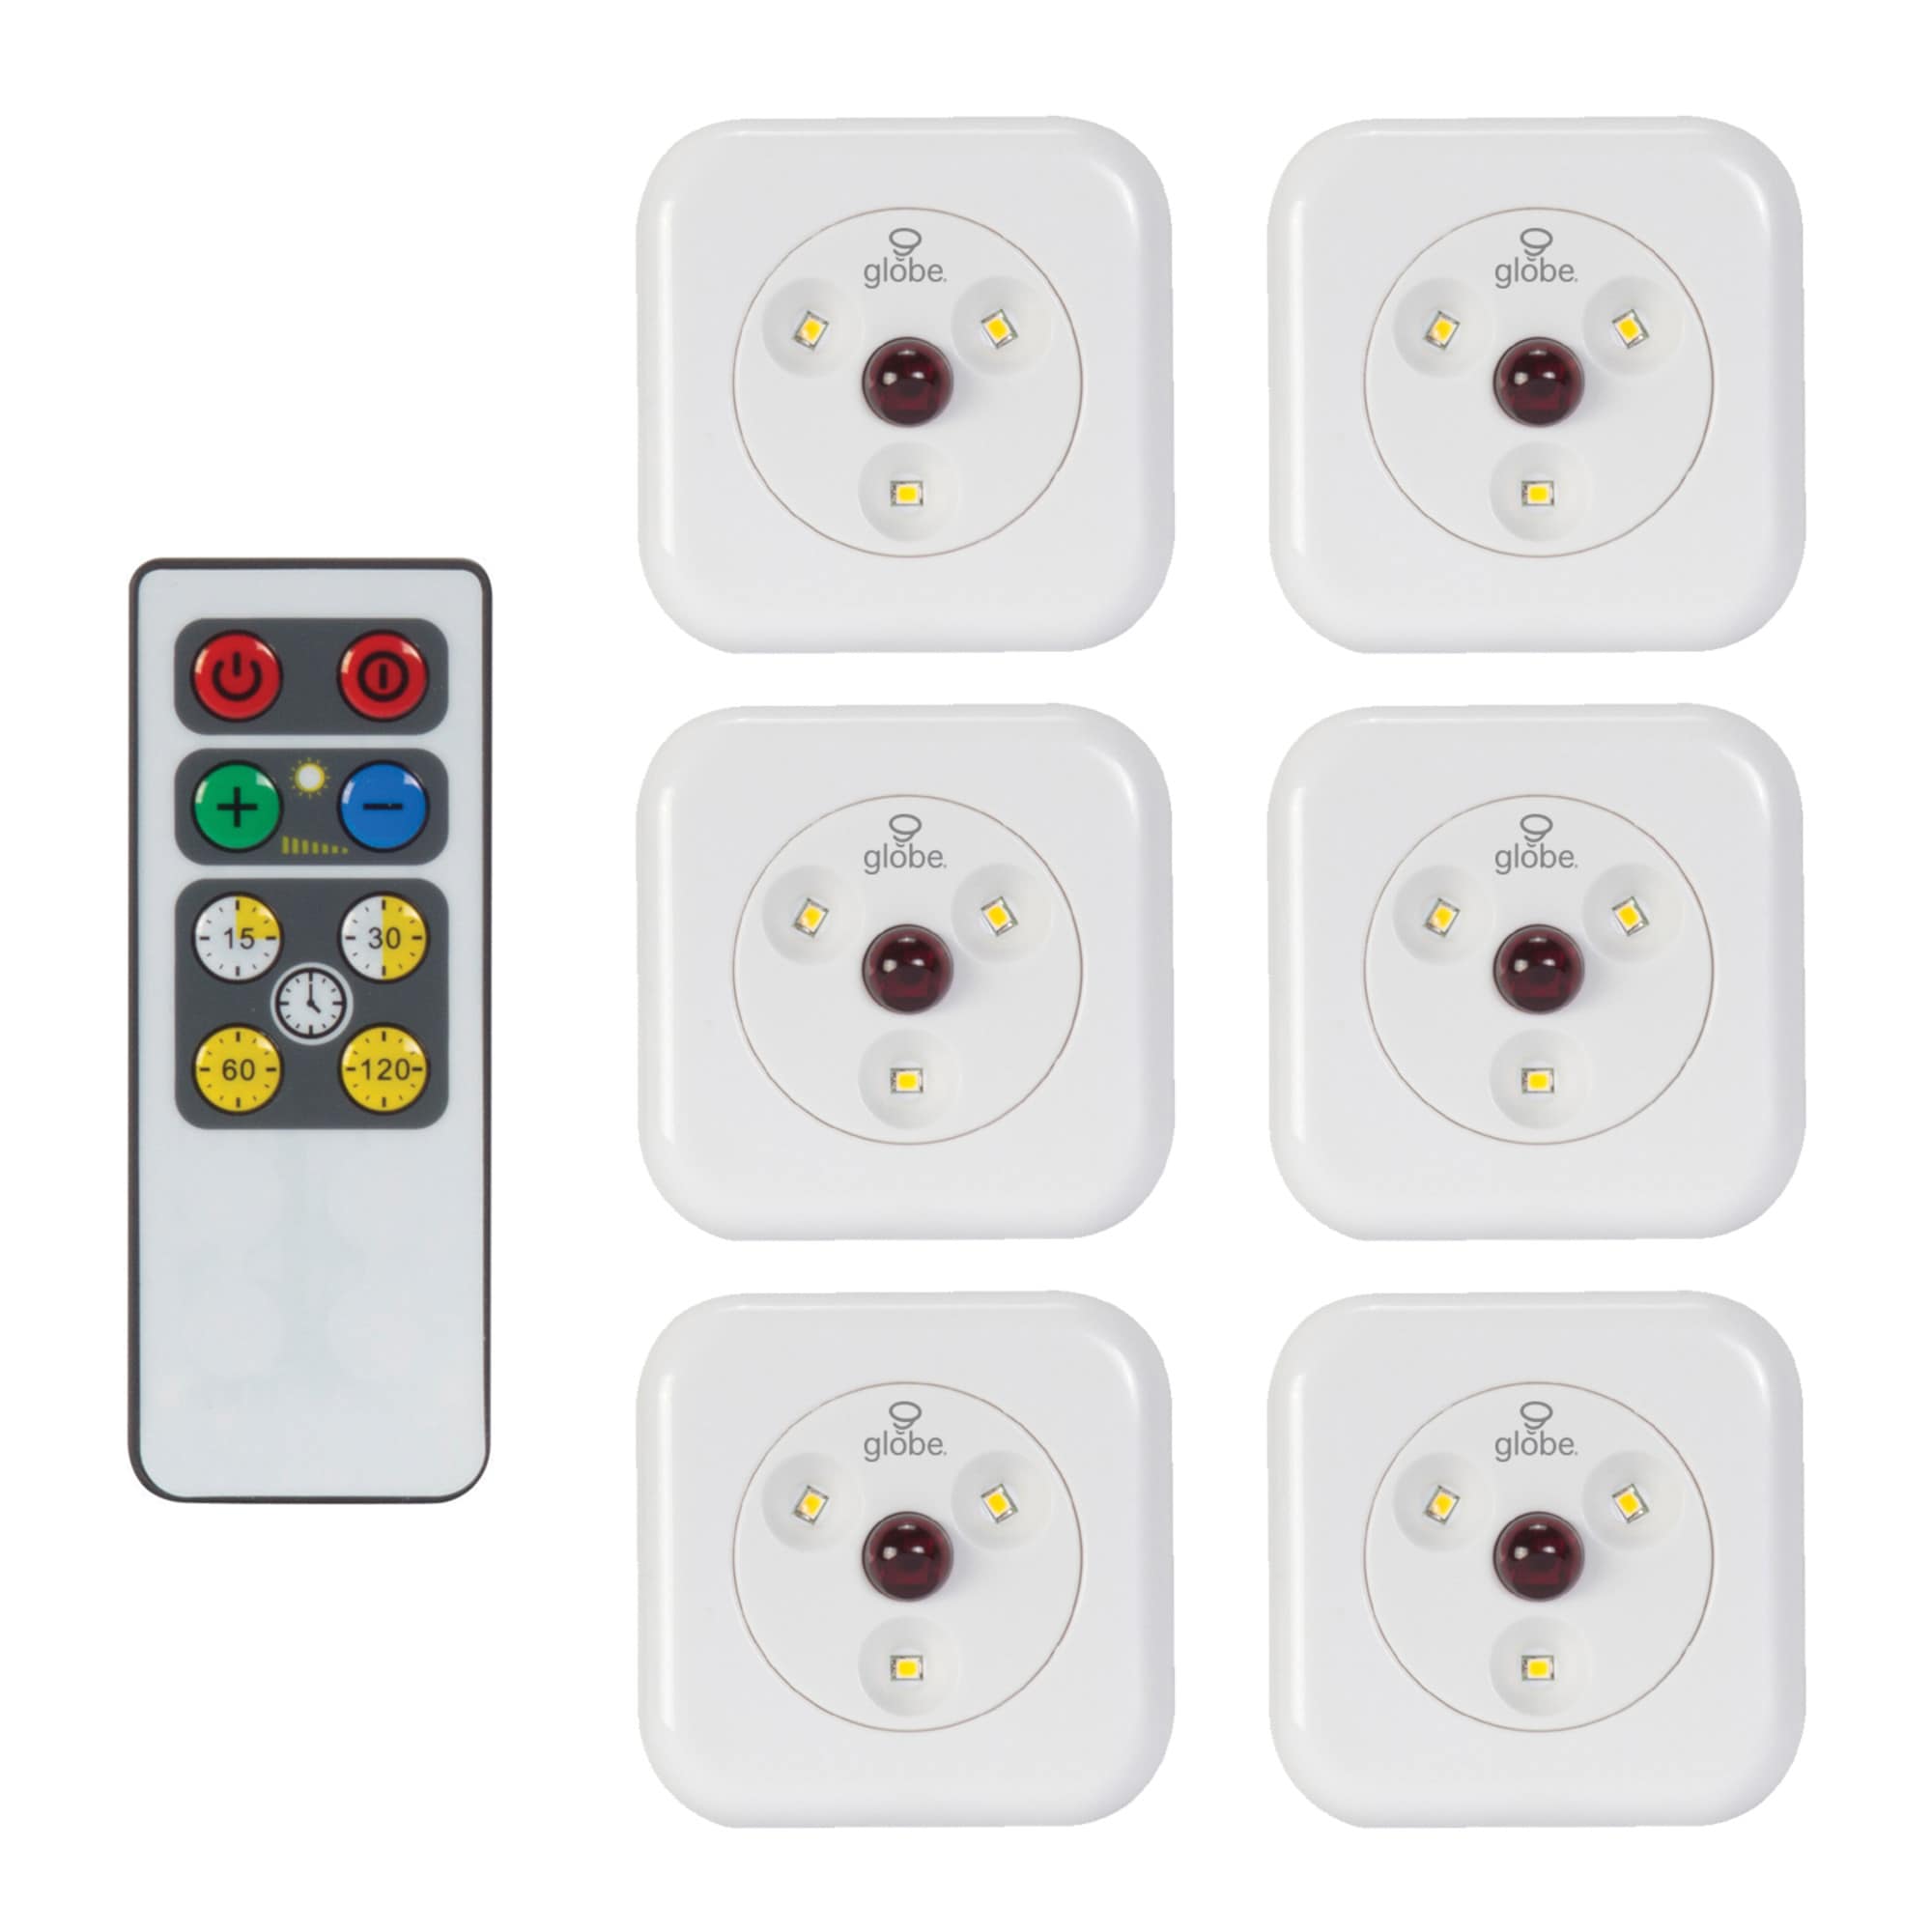 Auraglow Remote Controlled Wireless LED Under Cabinet Puck Lights - 3 Pack